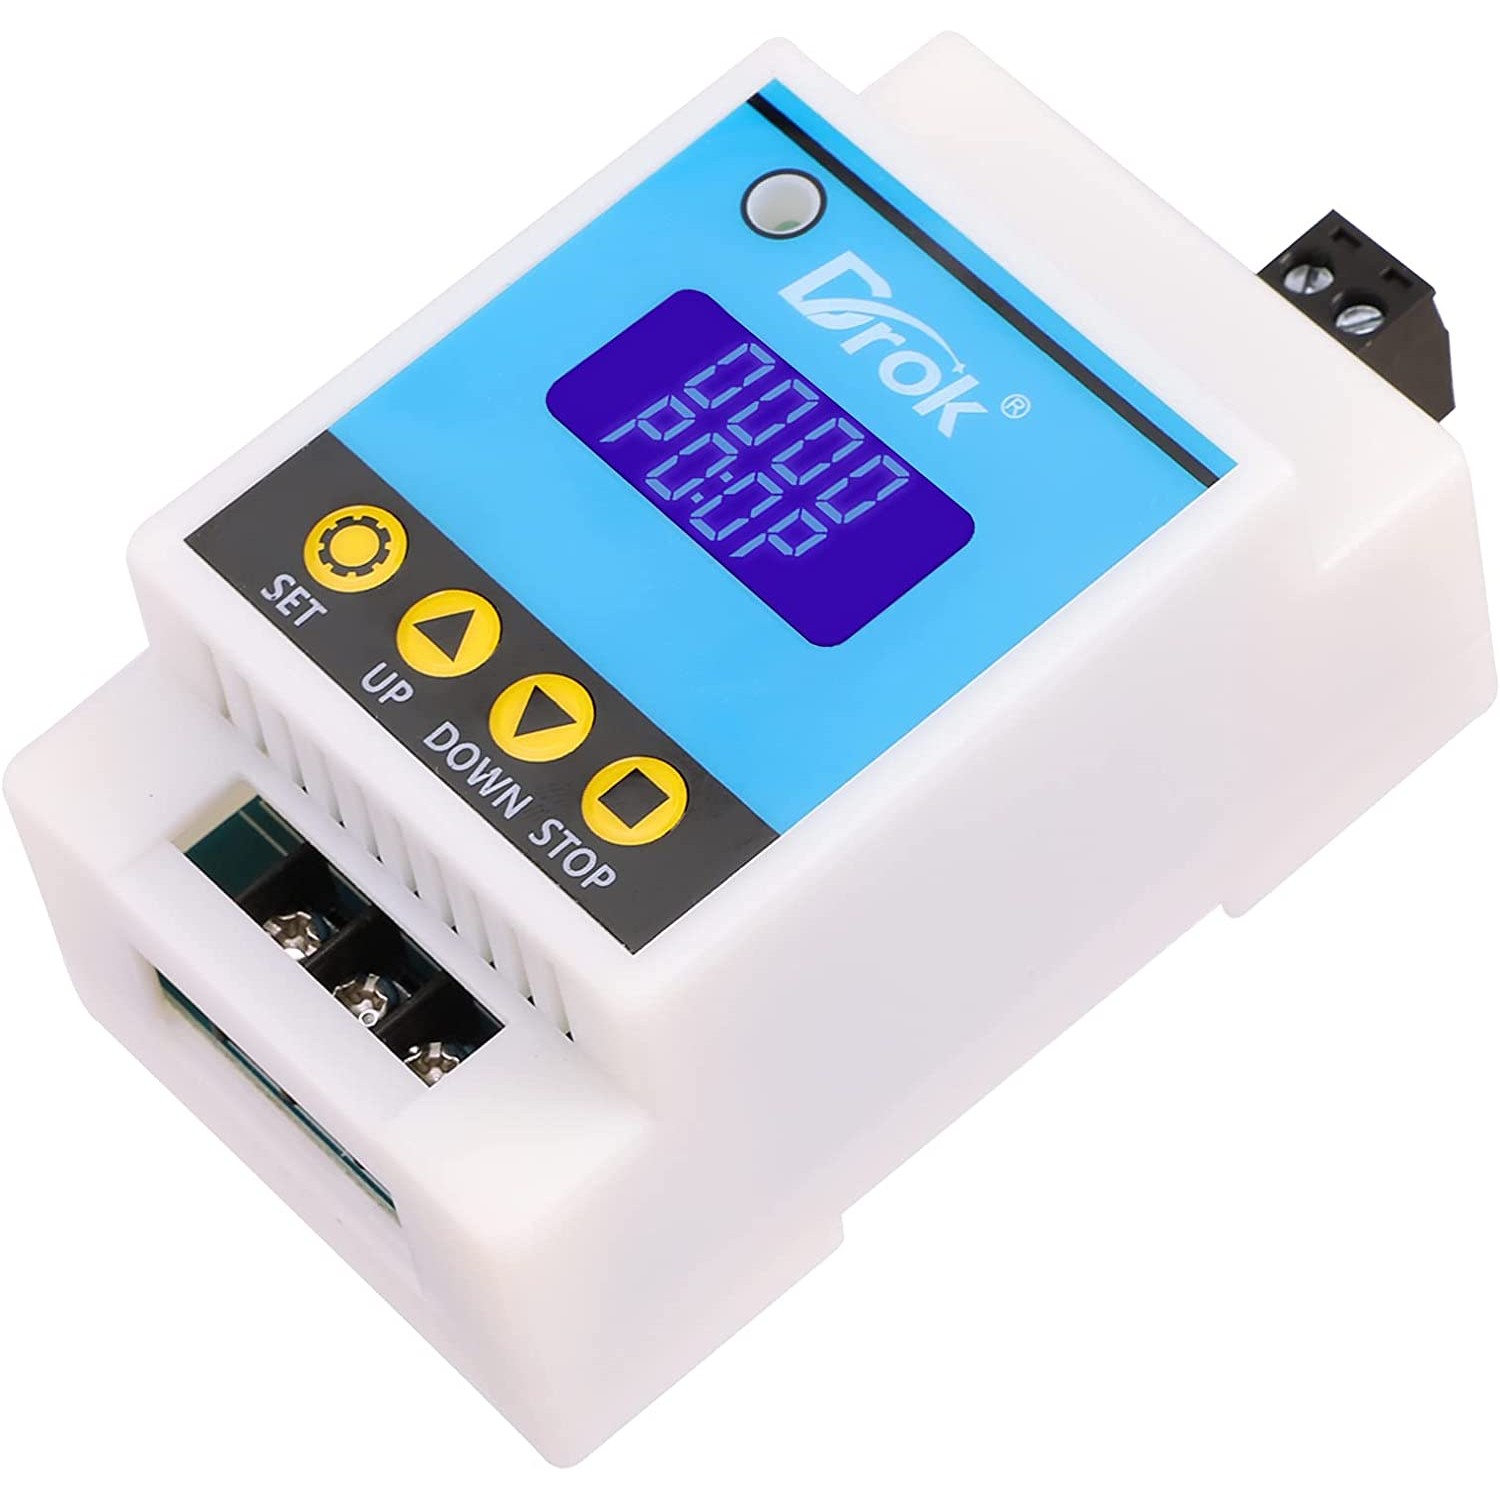 regnskyl klaver Underholde Delay Relay Module, DROK DC 6-30V Timer Relay 6V 12V 24V 0.01s-9999min  50-130mA Digital Timer Cycle Delay, Power Supply ON/Off Controller, 10  Working Modes with LCD Display